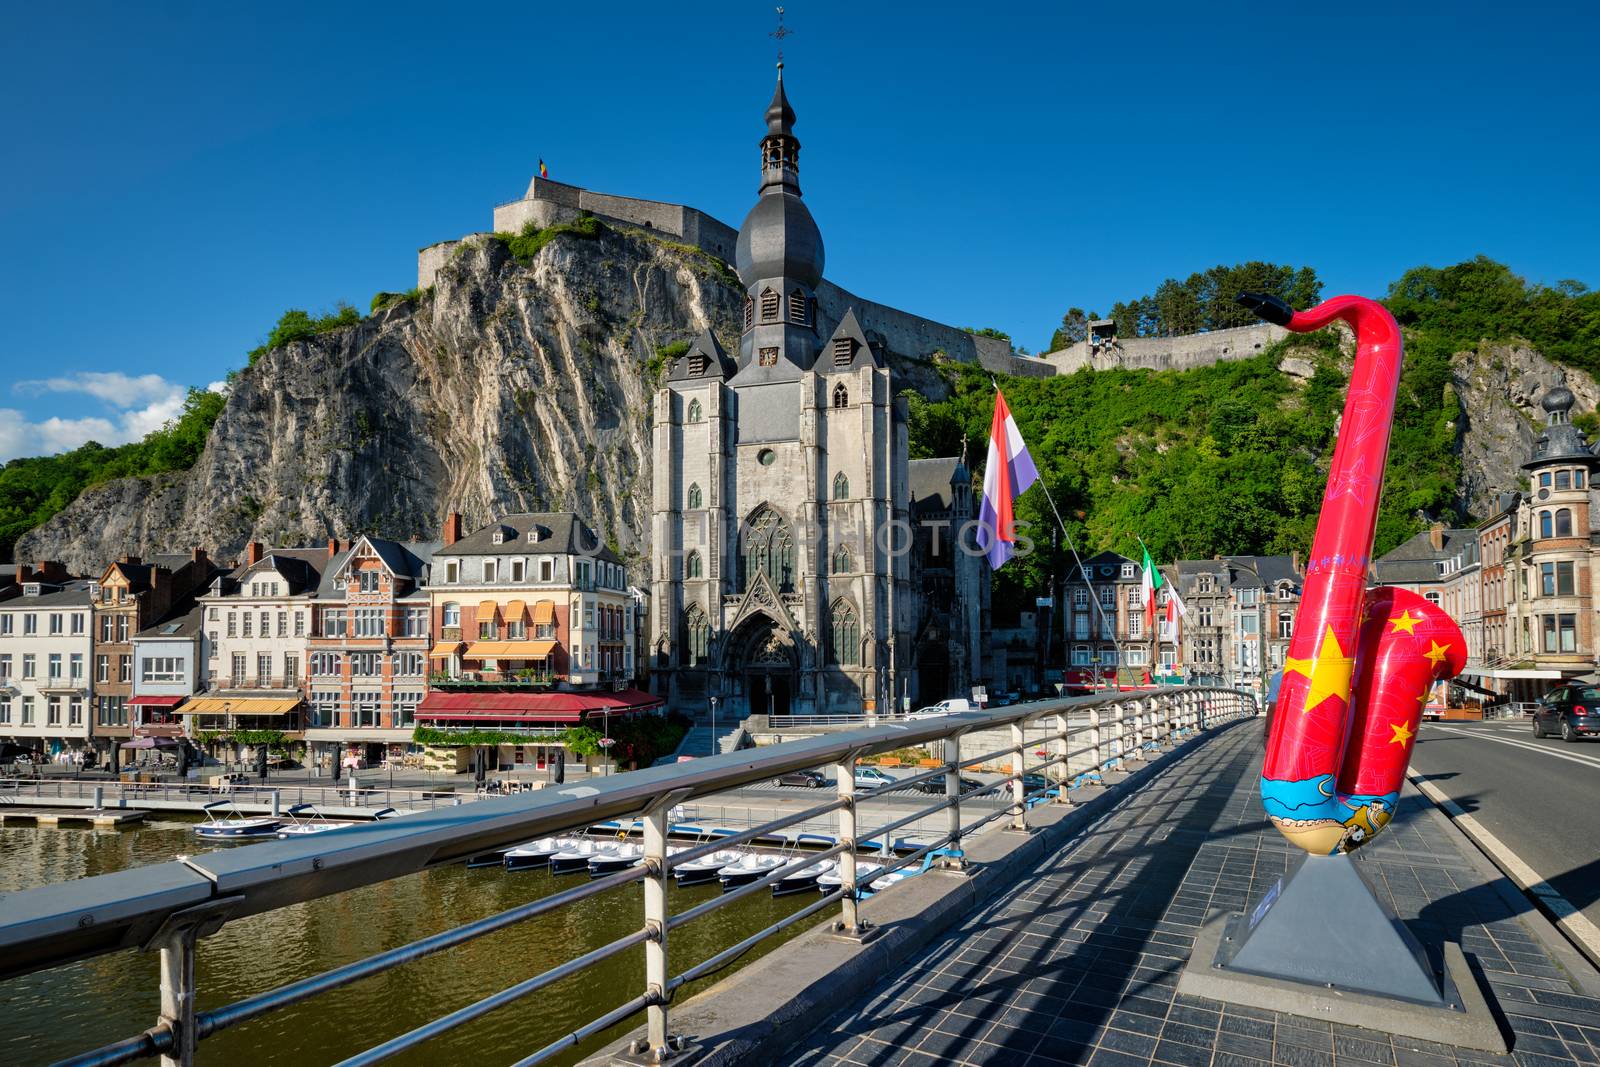 View of picturesque Dinant town. Belgium by dimol